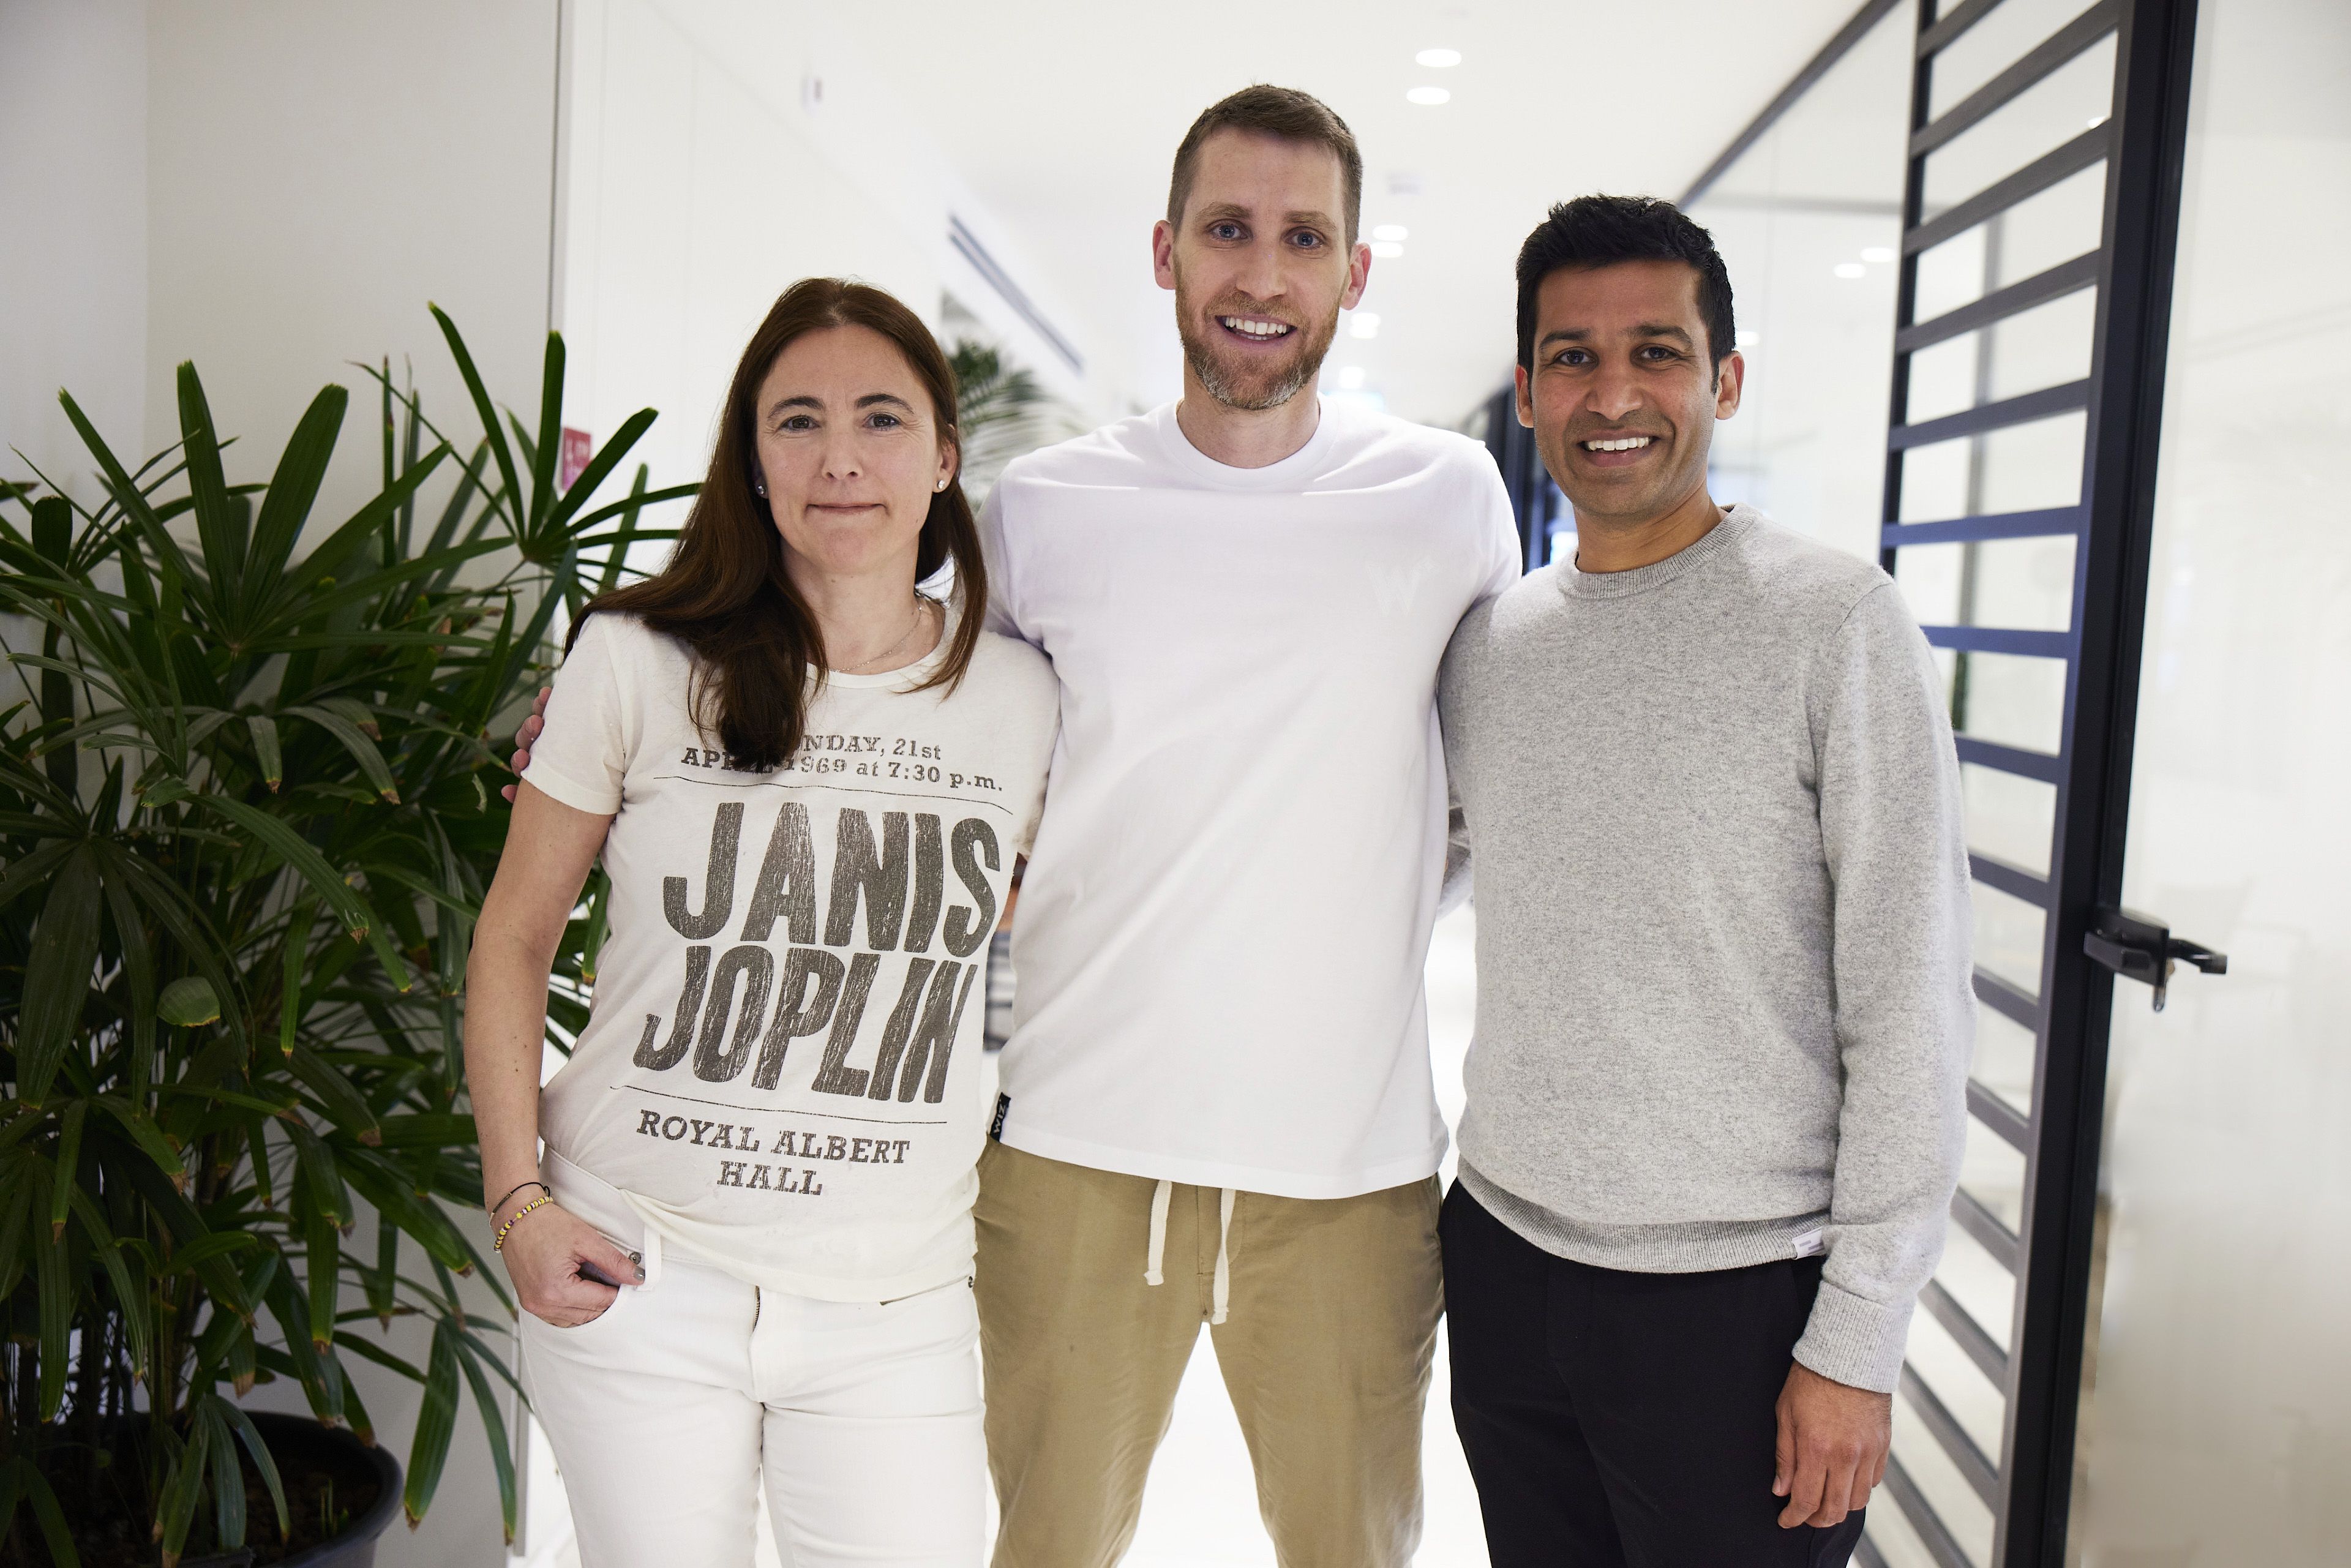 Ana Andreescu, VP Marketing &amp; Comms at Index Ventures (left), Assaf Rappapport, CEO and Co-Founder of Wiz (center) and Shardul Shah, Parter at Index Ventures (right)